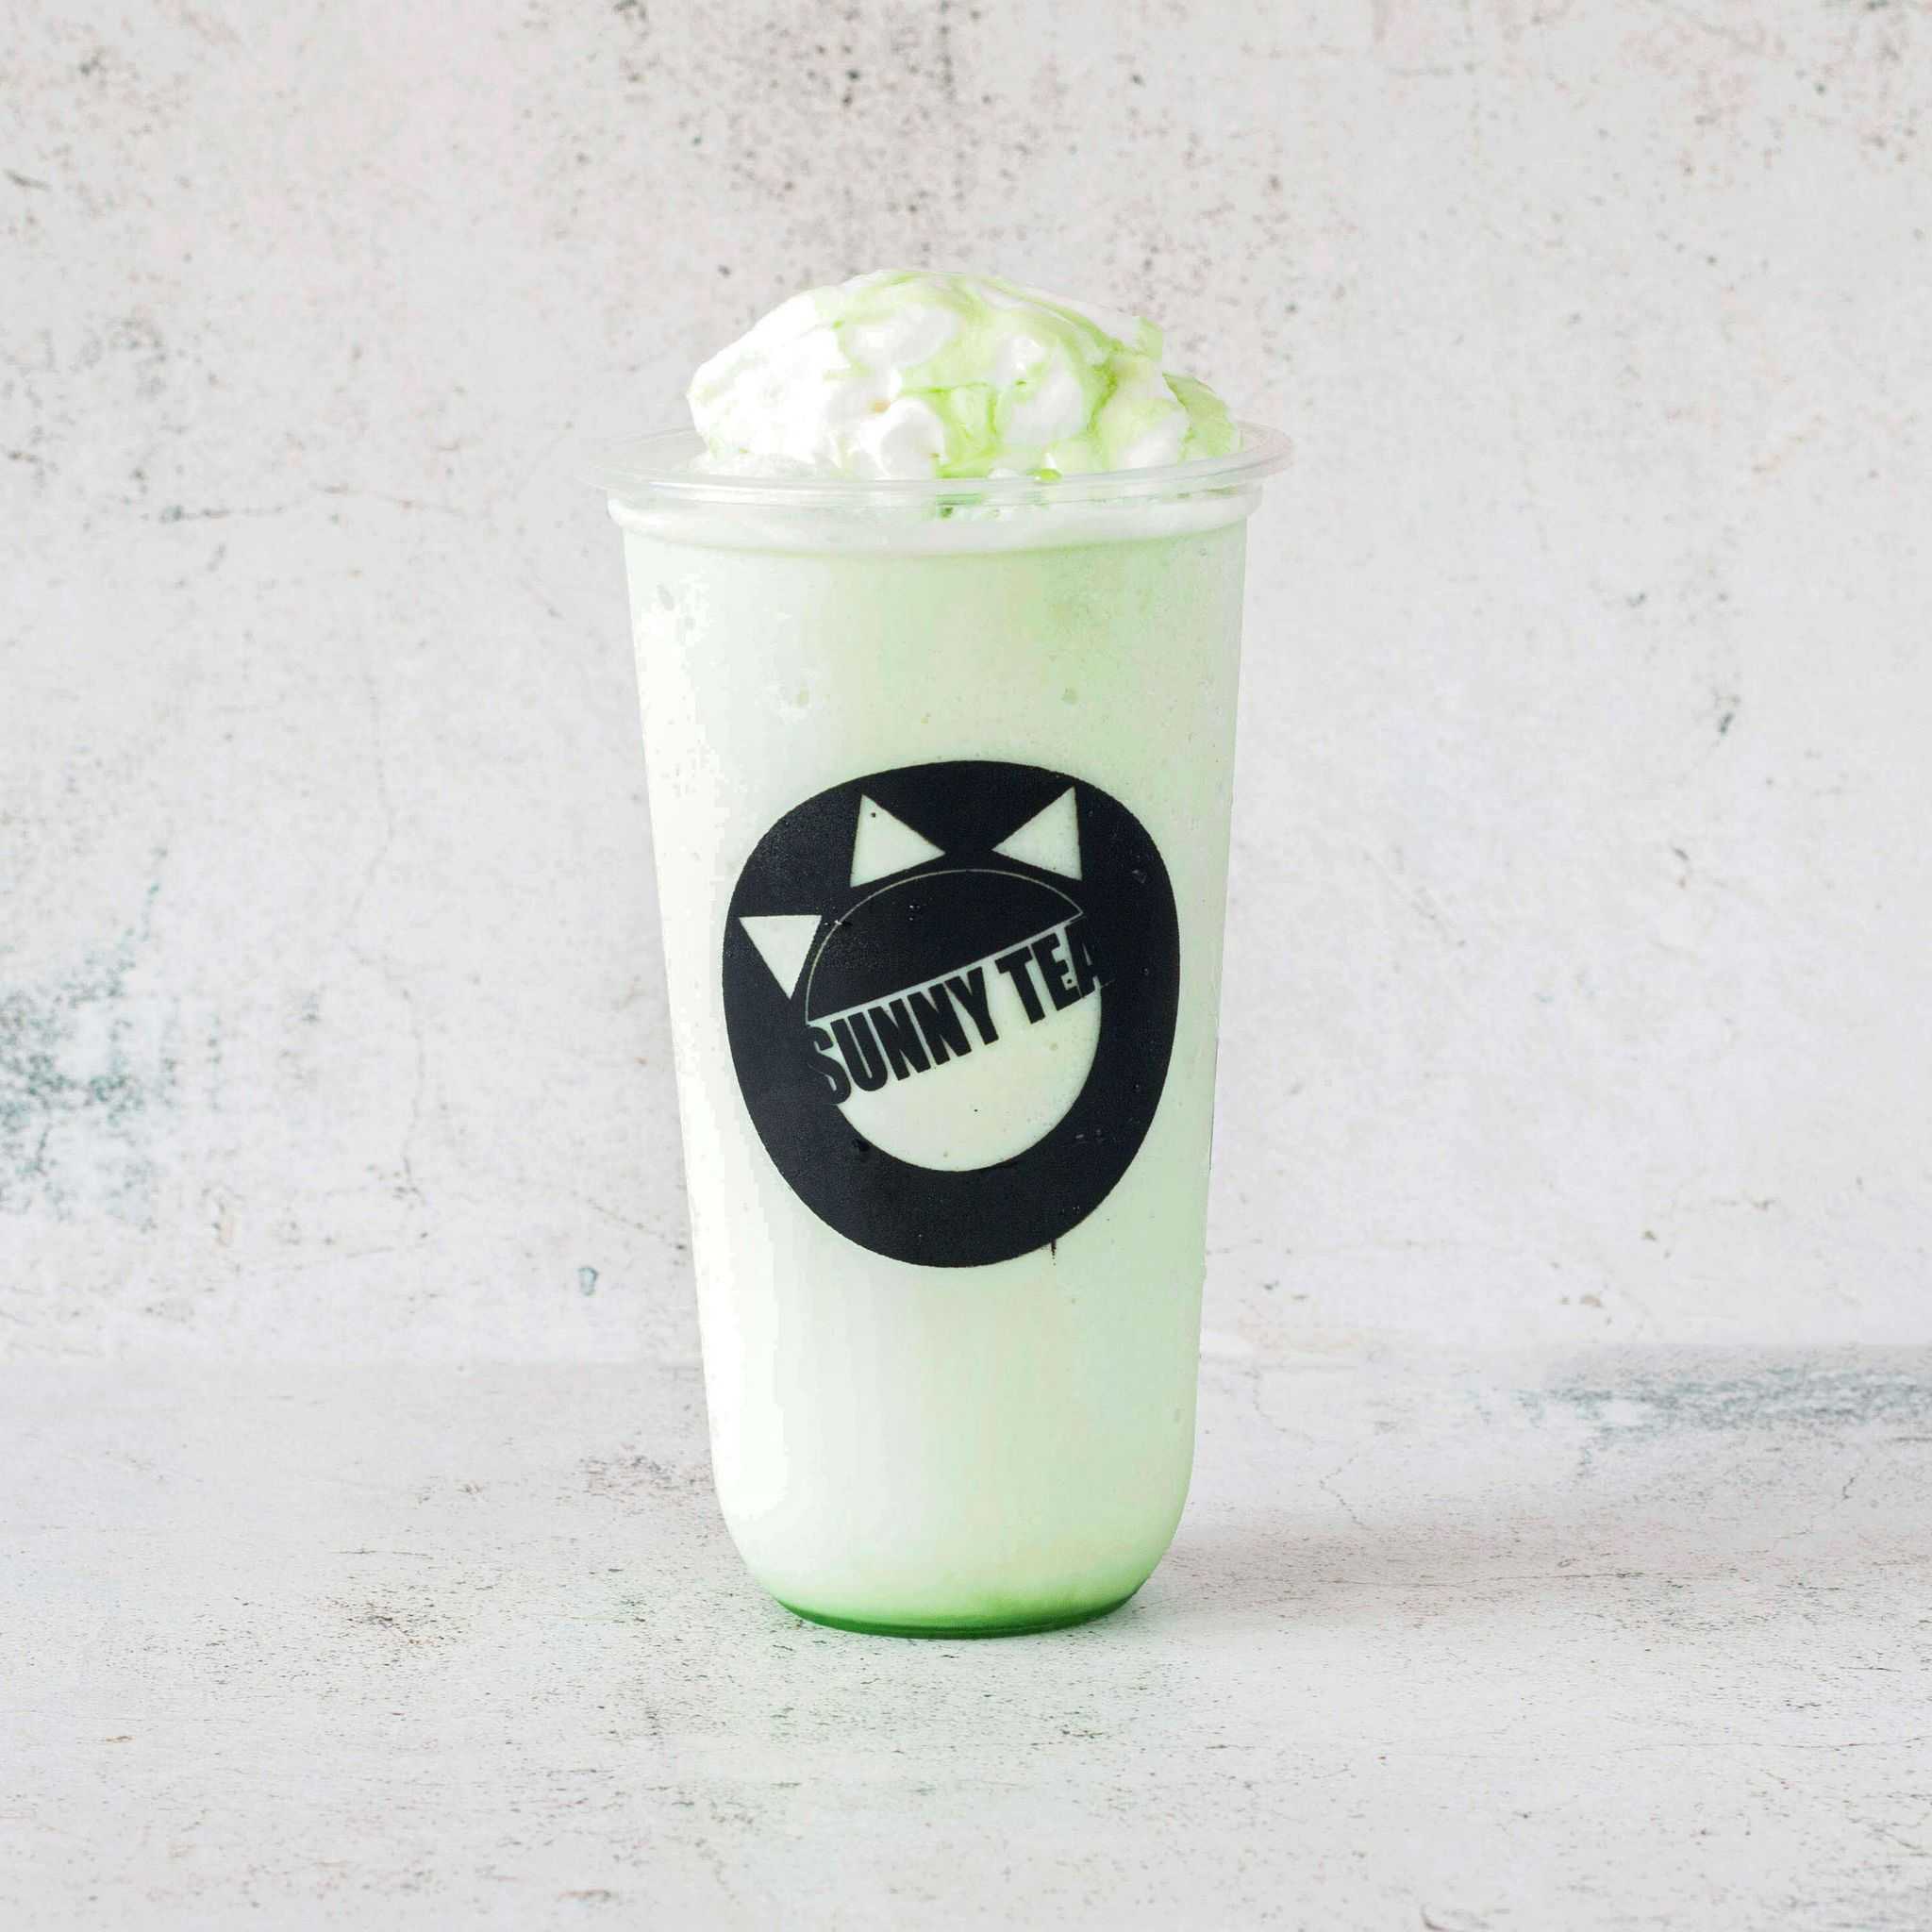 Peppermint frappe